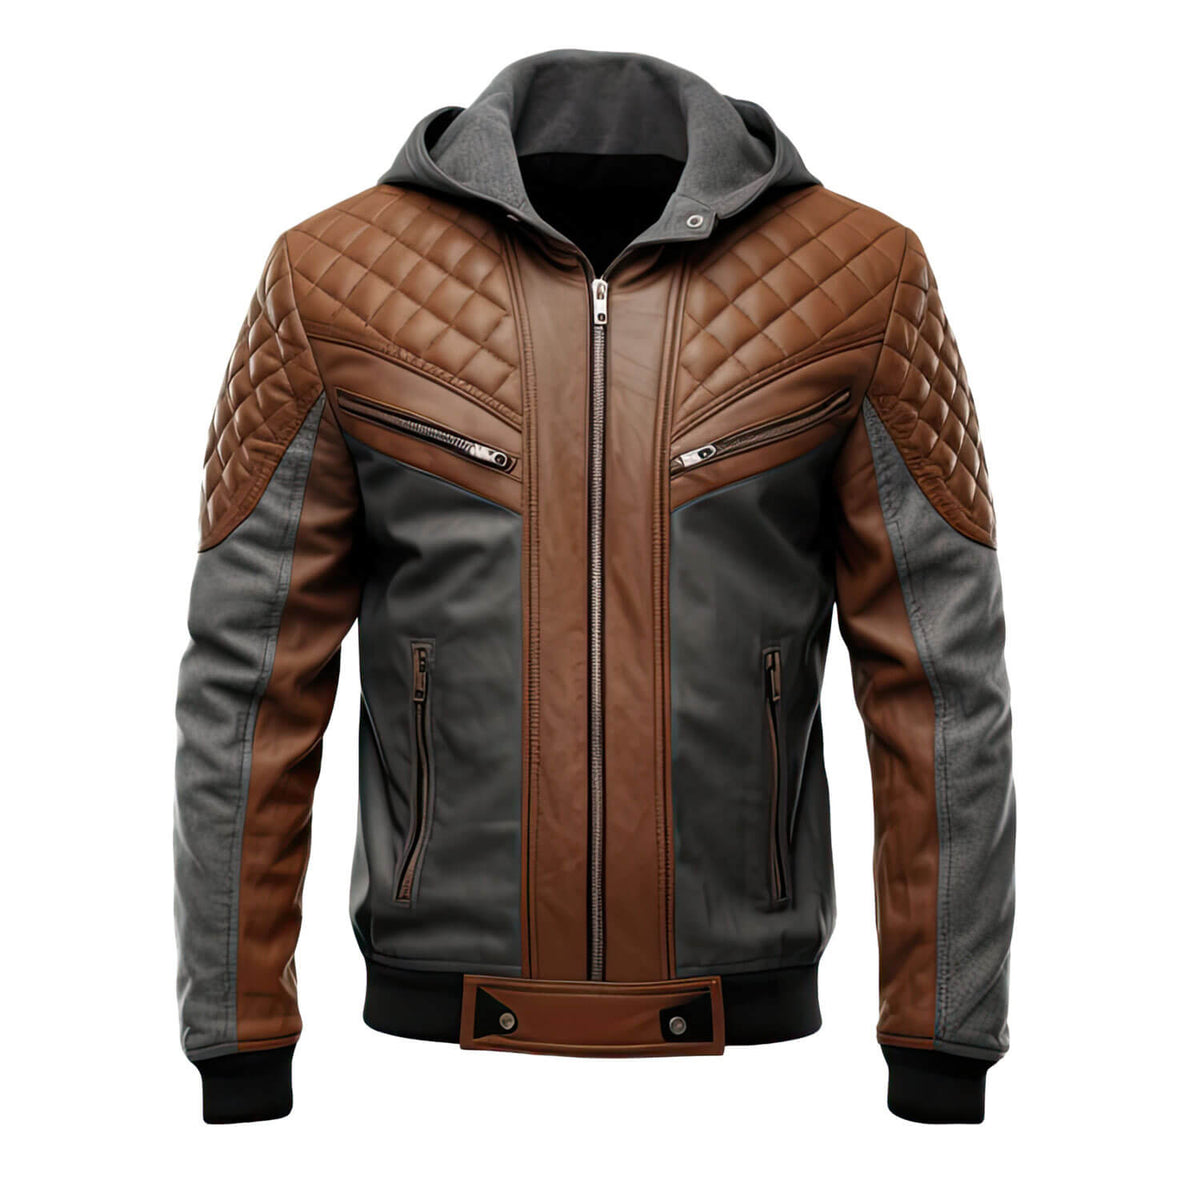 Men’s Charcoal Grey Brown Genuine Sheepskin Diamond Quilted Biker Hooded Stylish Zip-Up Moto Bomber Leather Jacket - Front View - AceCart